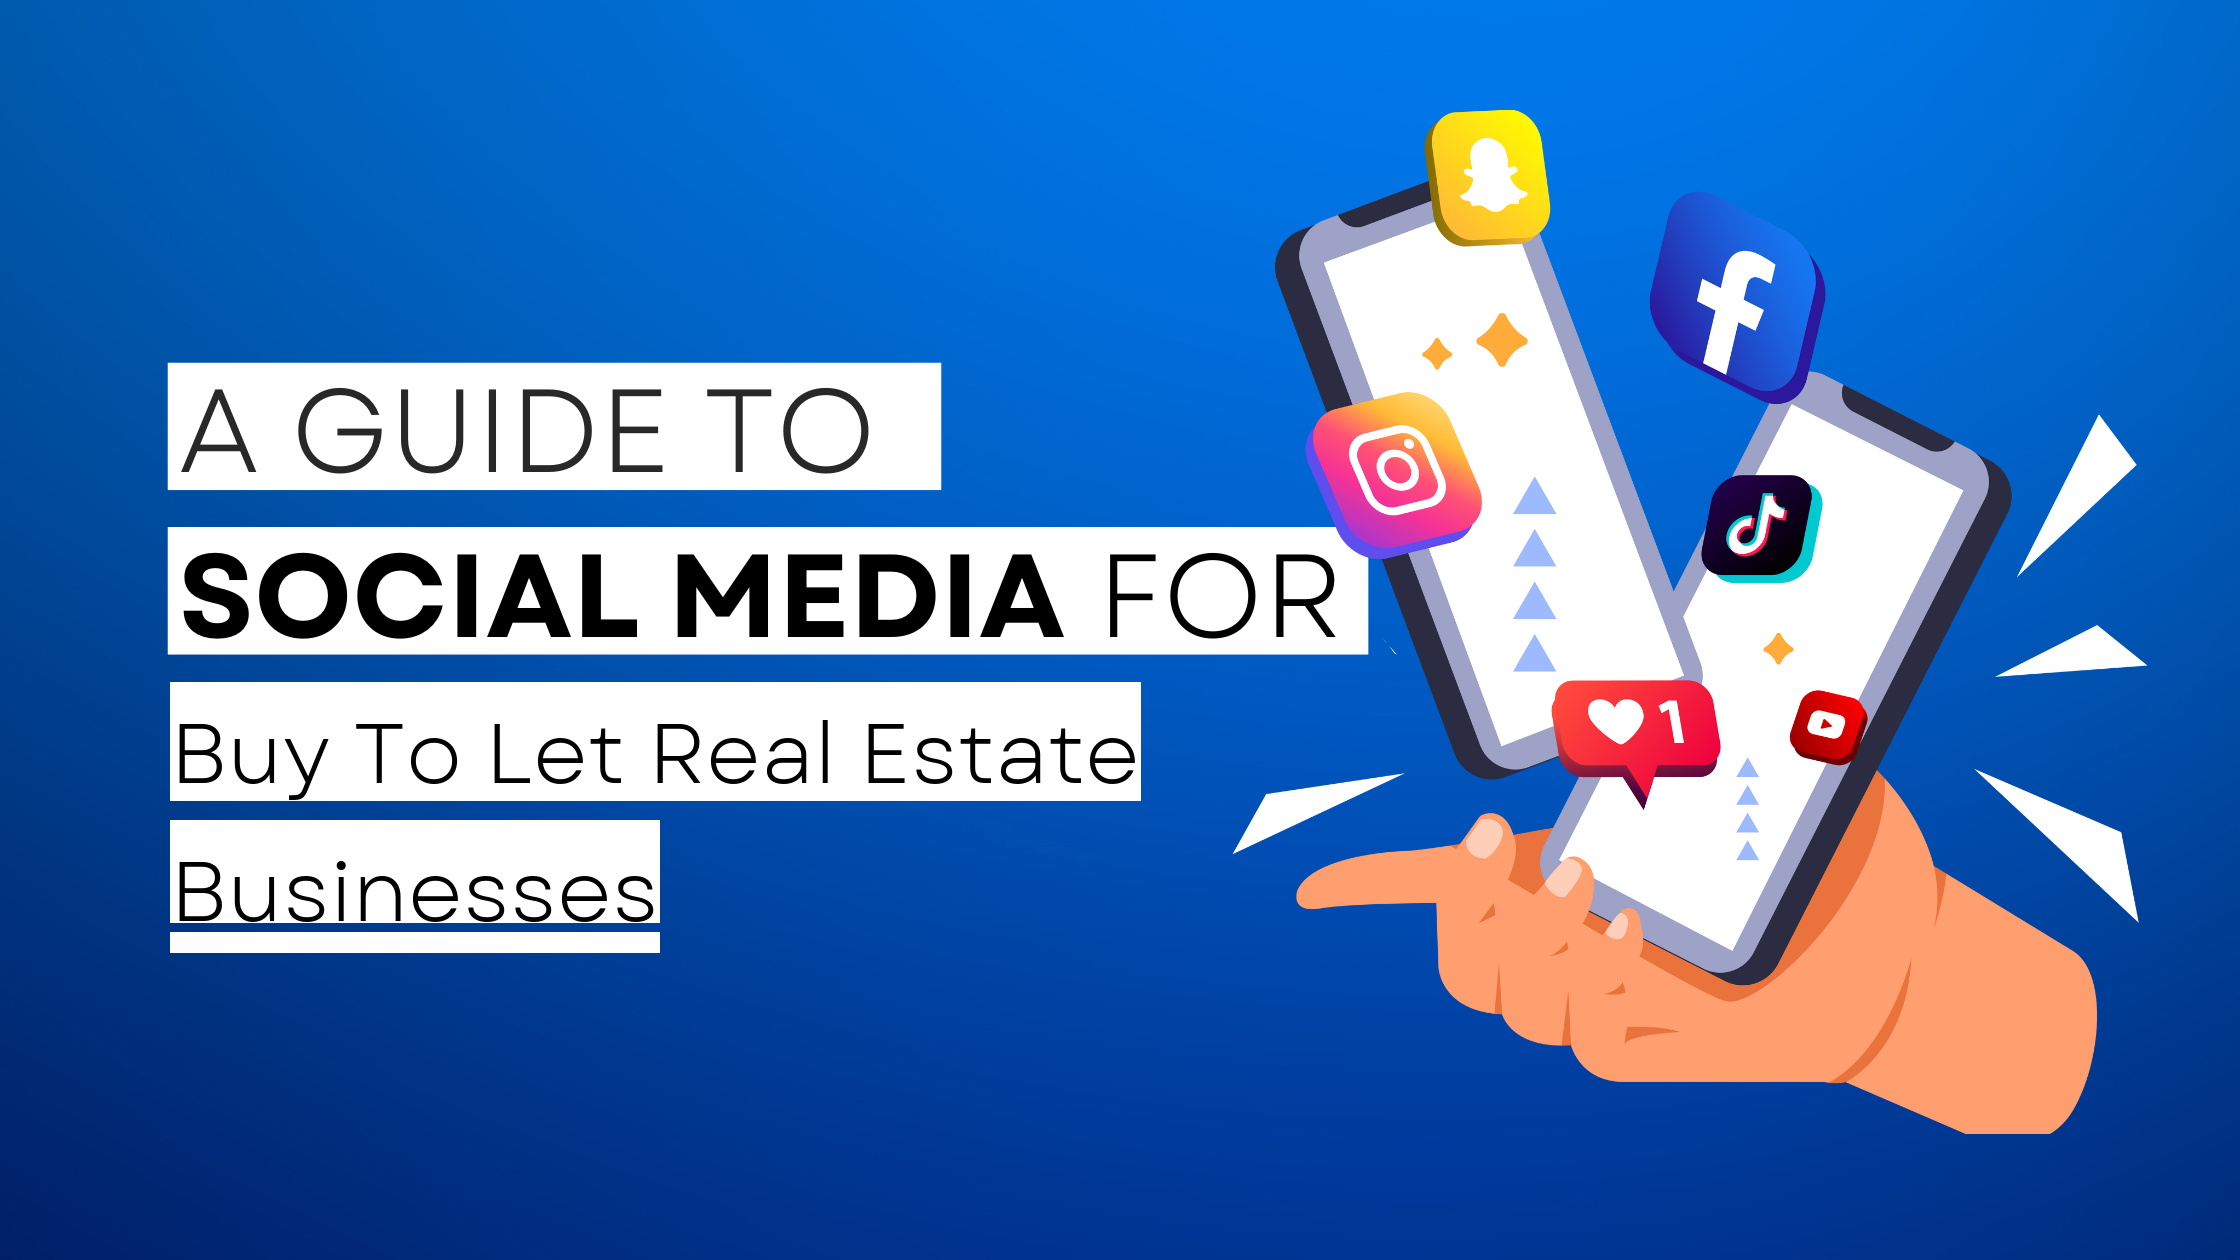 How to start Buy To Let Real Estate on social media